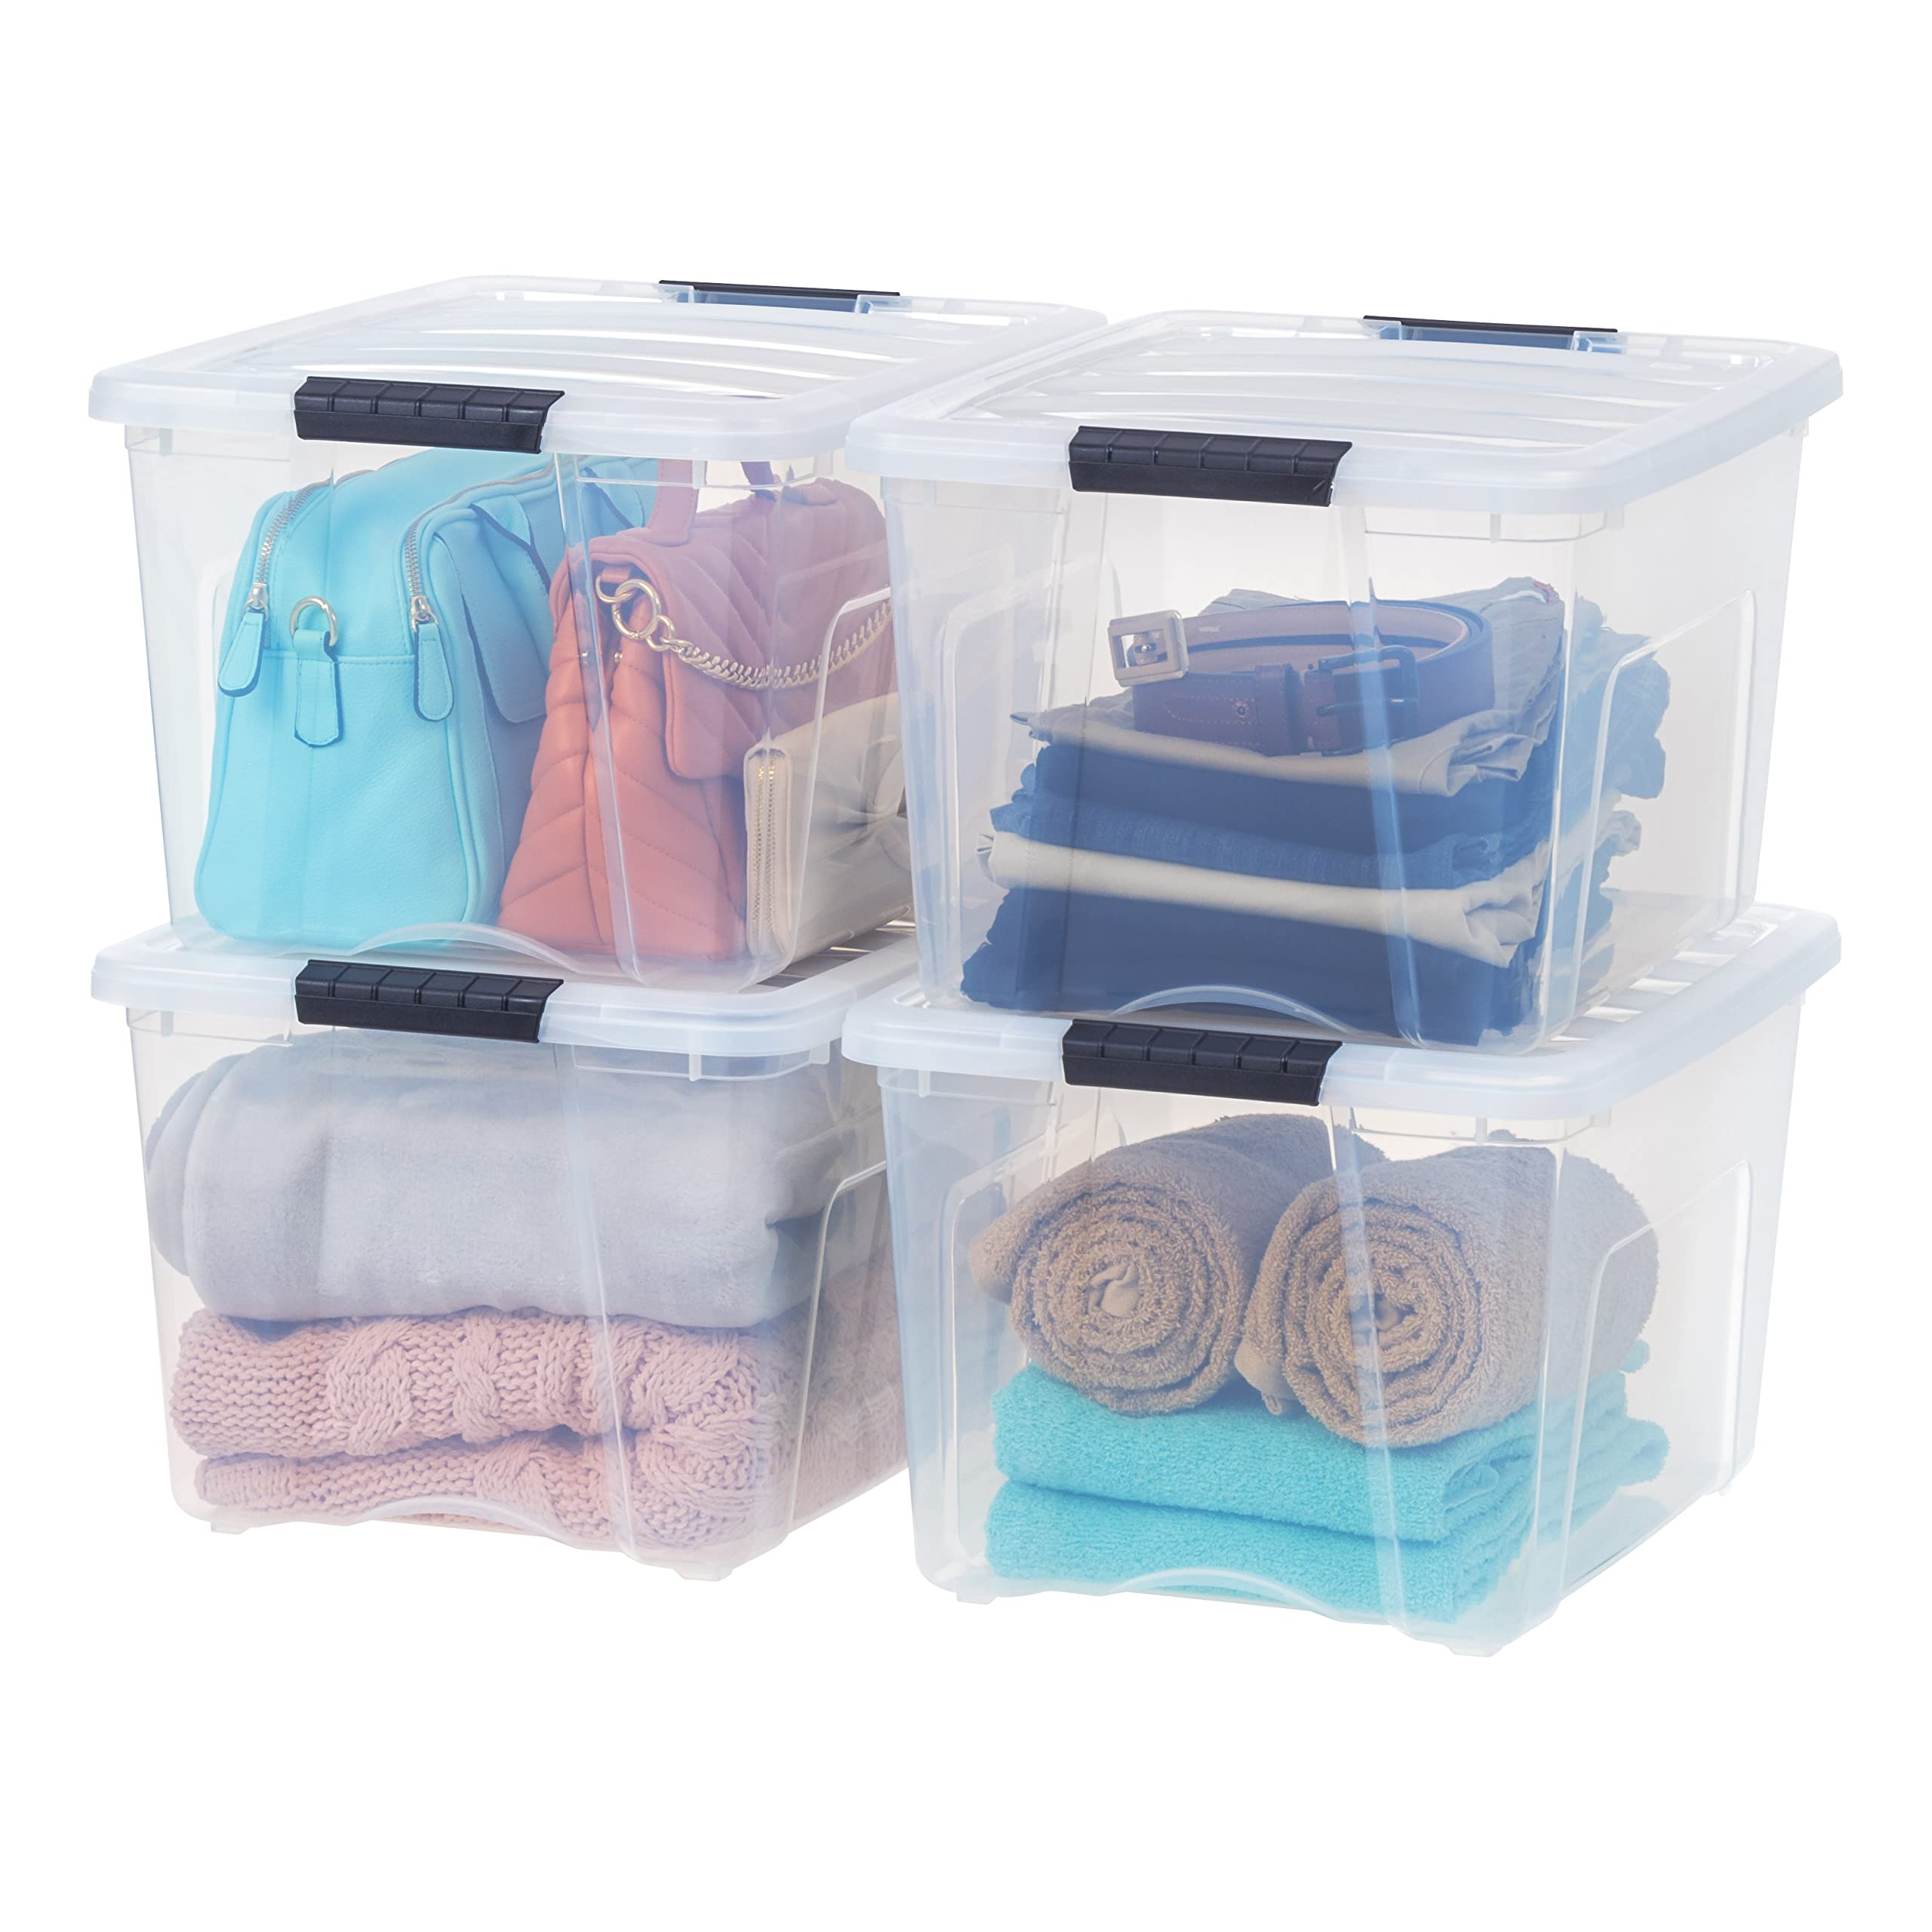  IRIS USA, Inc. IRIS USA 40 Quart Stackable Plastic Storage Bins with Lids and Latching Buckles, 4 Pack - Clear, Containers with Lids and Latches, Durable Nestable Closet, Garage, Totes, Tub Boxes...